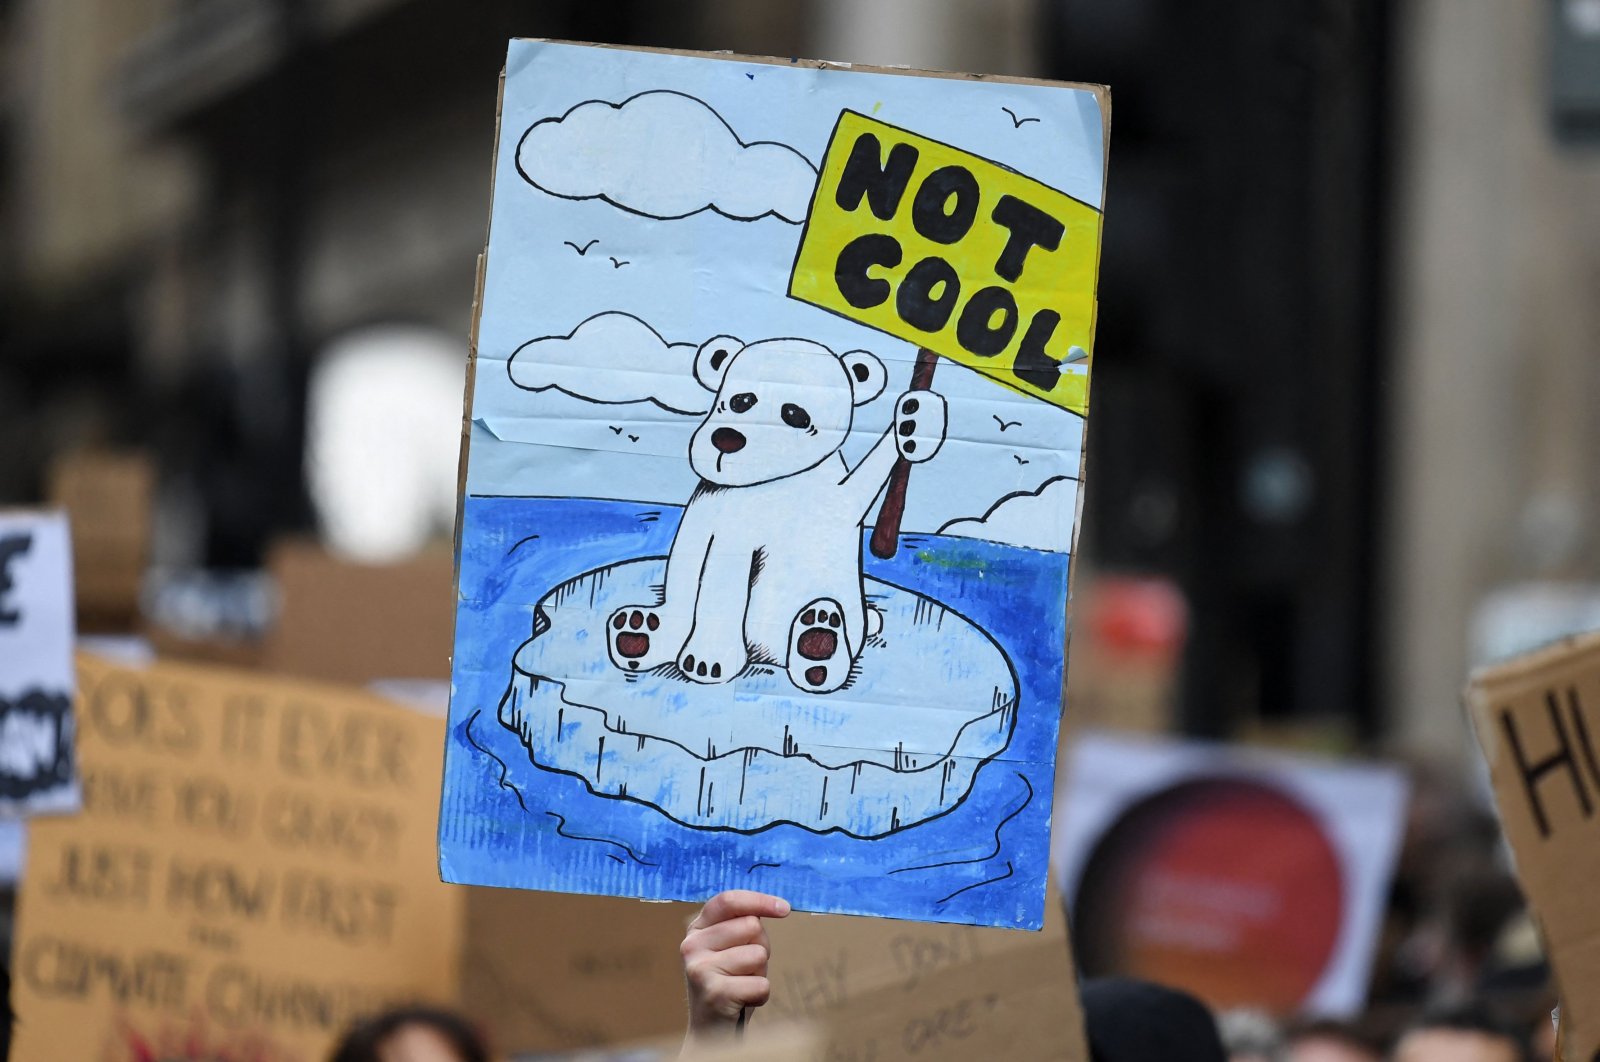 Demonstrators carry placards at a Fridays for Future march during the United Nations Climate Change Conference – COP26 – in Glasgow, Scotland, U.K., Nov. 5, 2021. (AFP Photo)